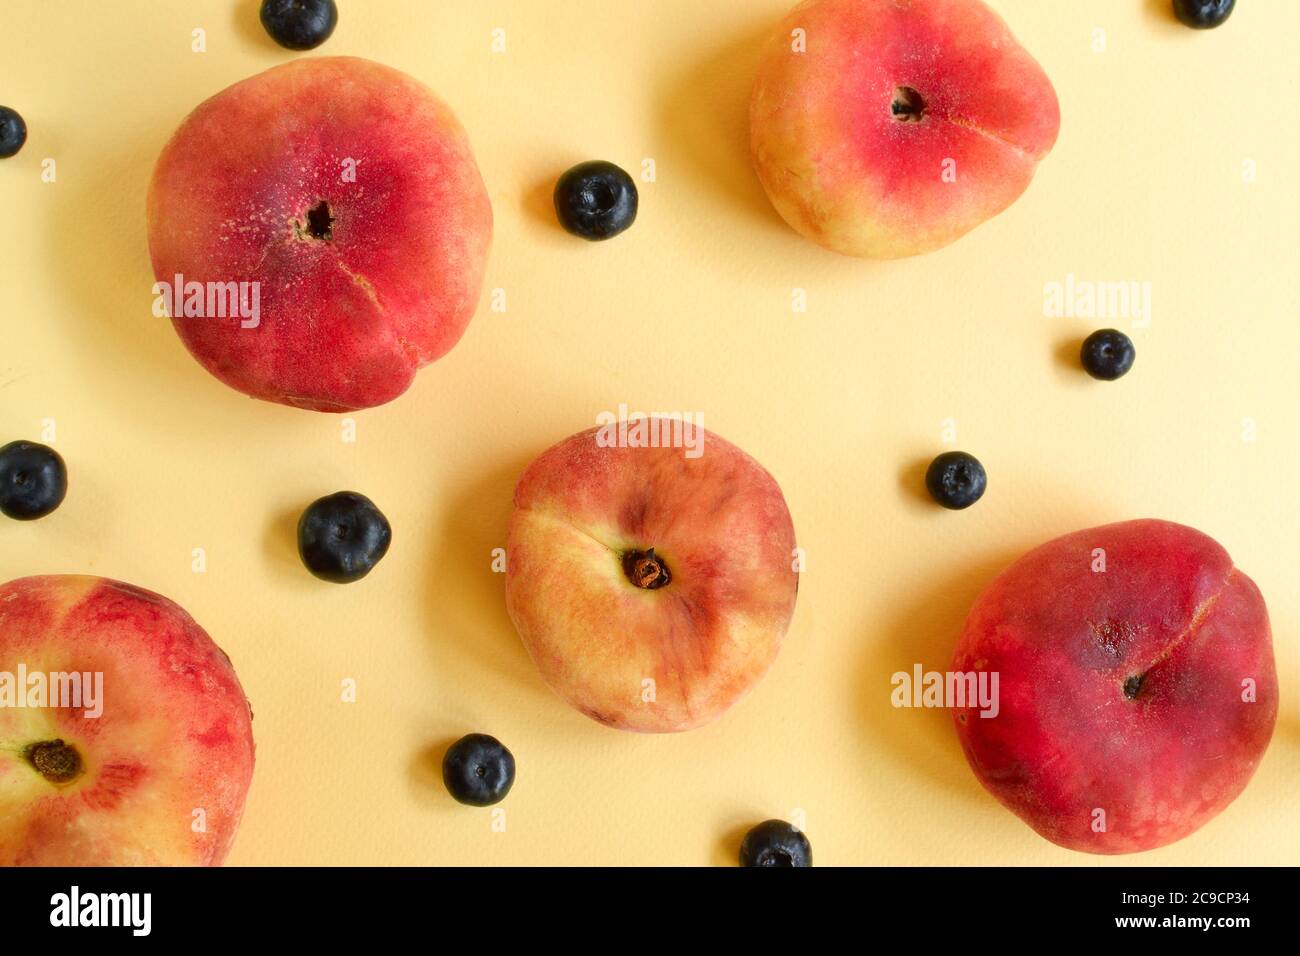 Peach on a yellow background. Juicy ripe peach and blueberry. Creative minimalistic food concept. Stock Photo